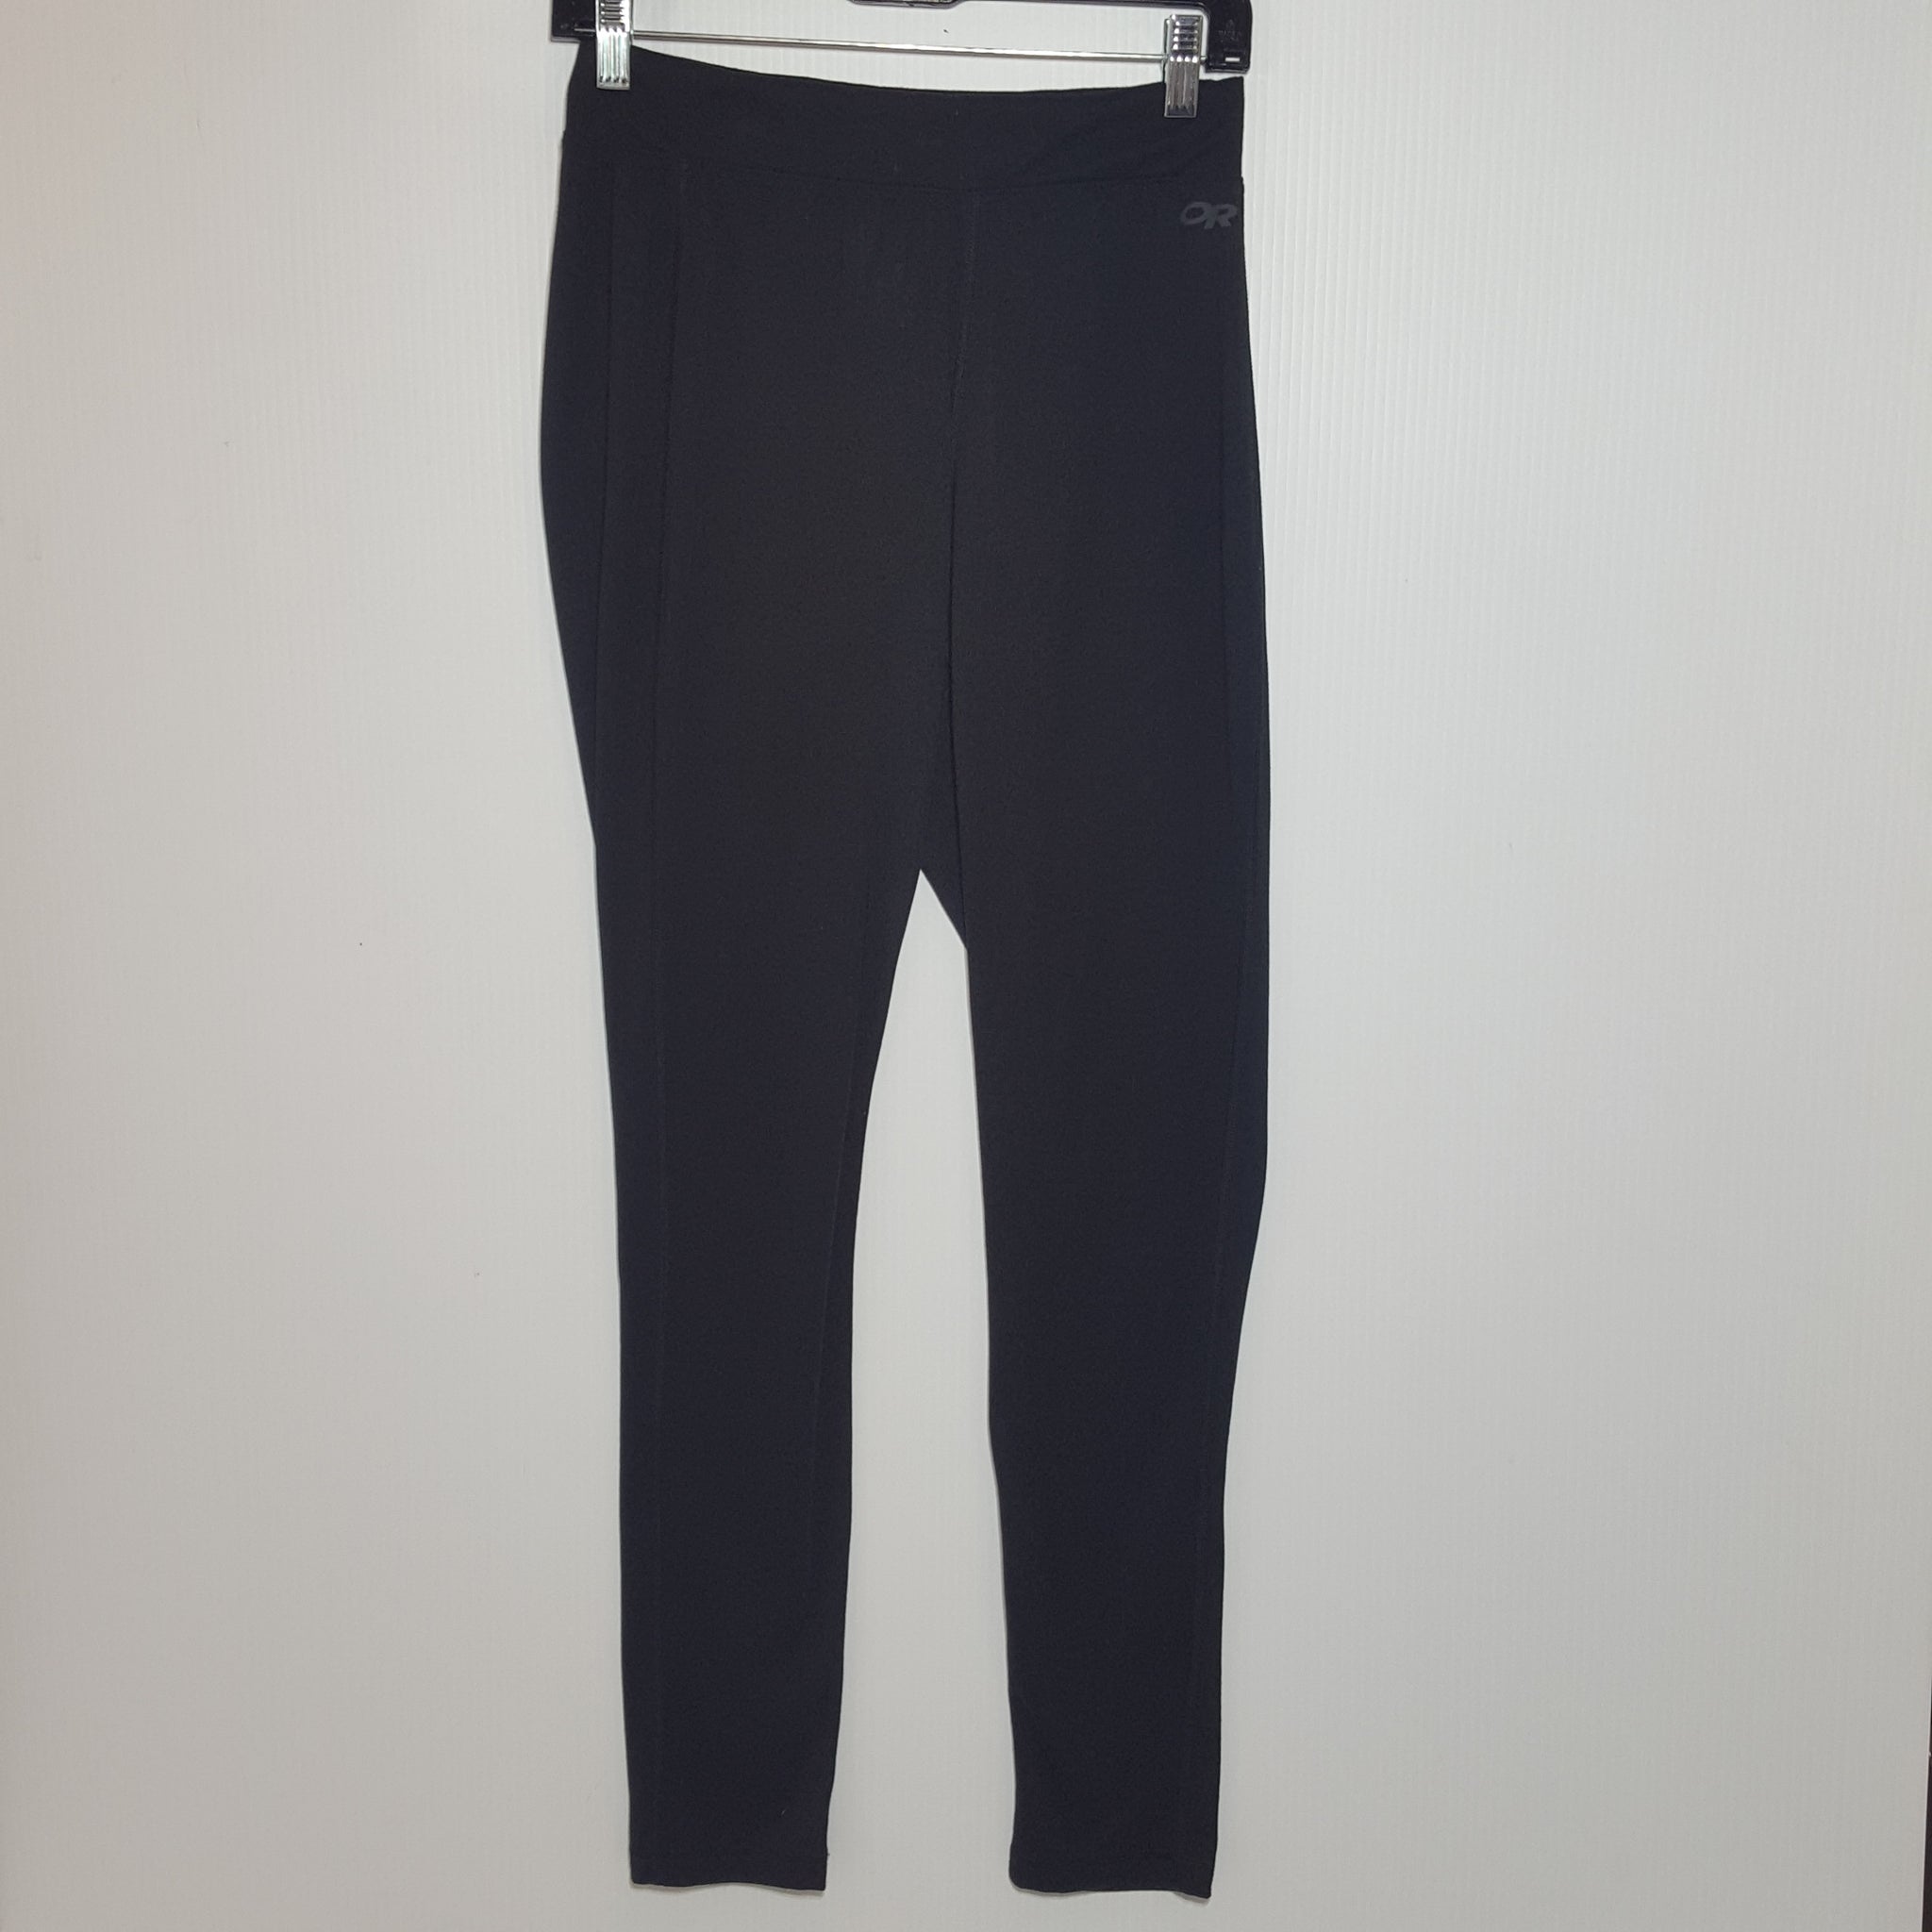 Outdoor Research Womens Baselayer Pants - Medium - Pre-owned